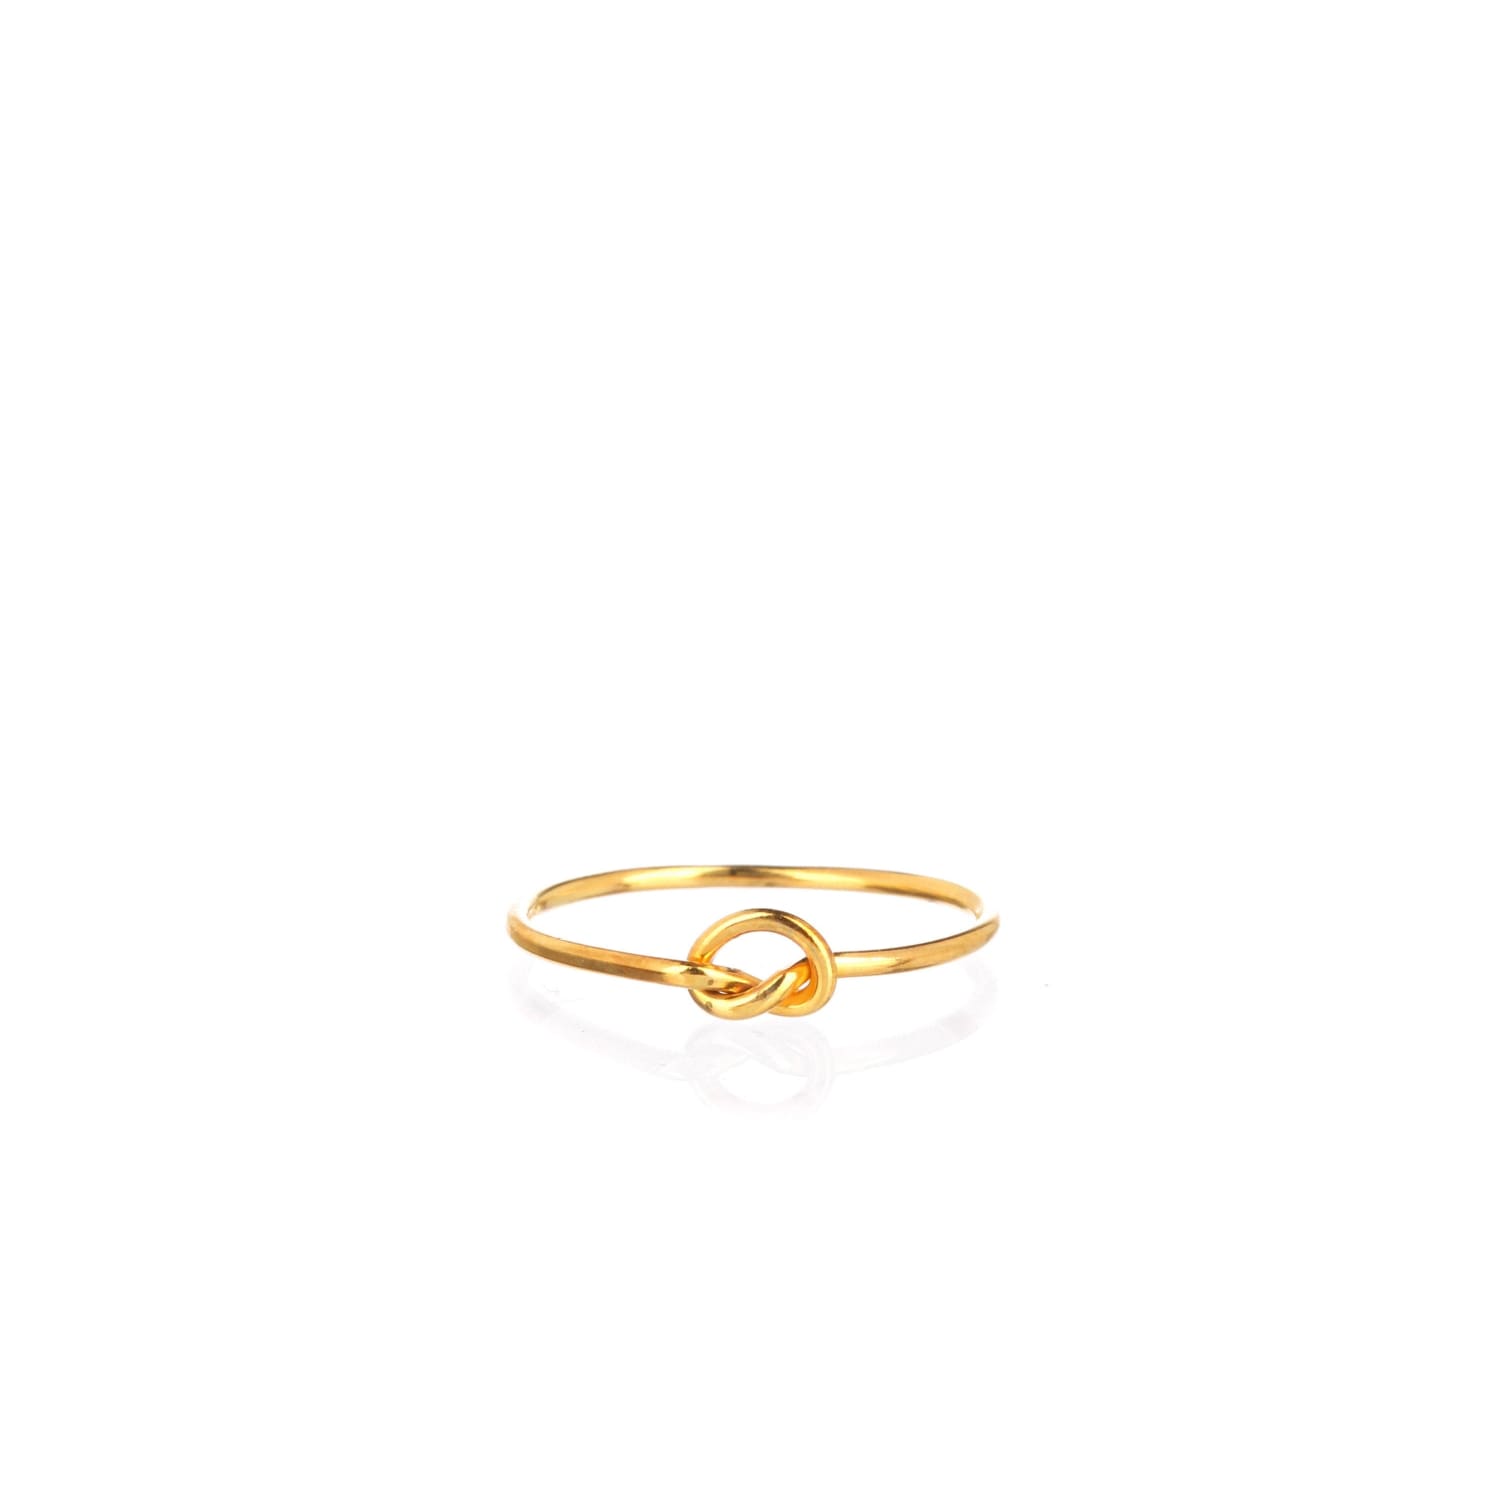 Single Love Knot Ring Sterling Silver Valentines Day Gift,